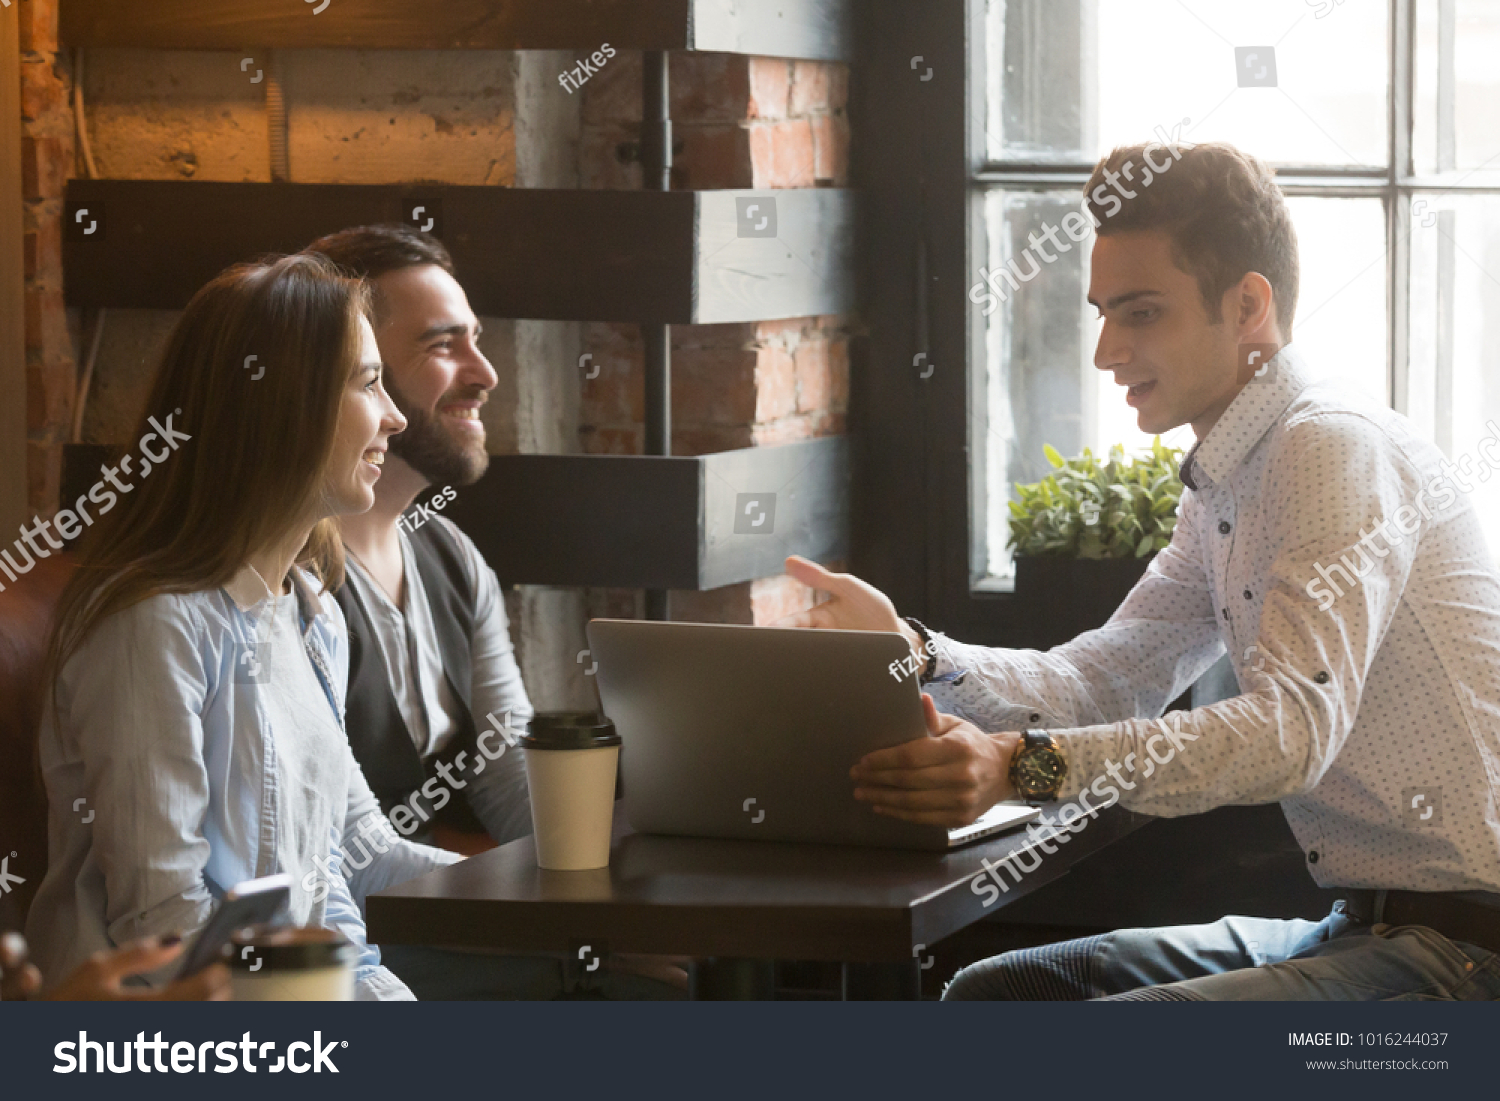 Insurance broker or salesman making offer to young millennial couple using laptop in cafe, realtor consulting customers about mortgage sitting at coffeehouse table pointing on computer screen #1016244037